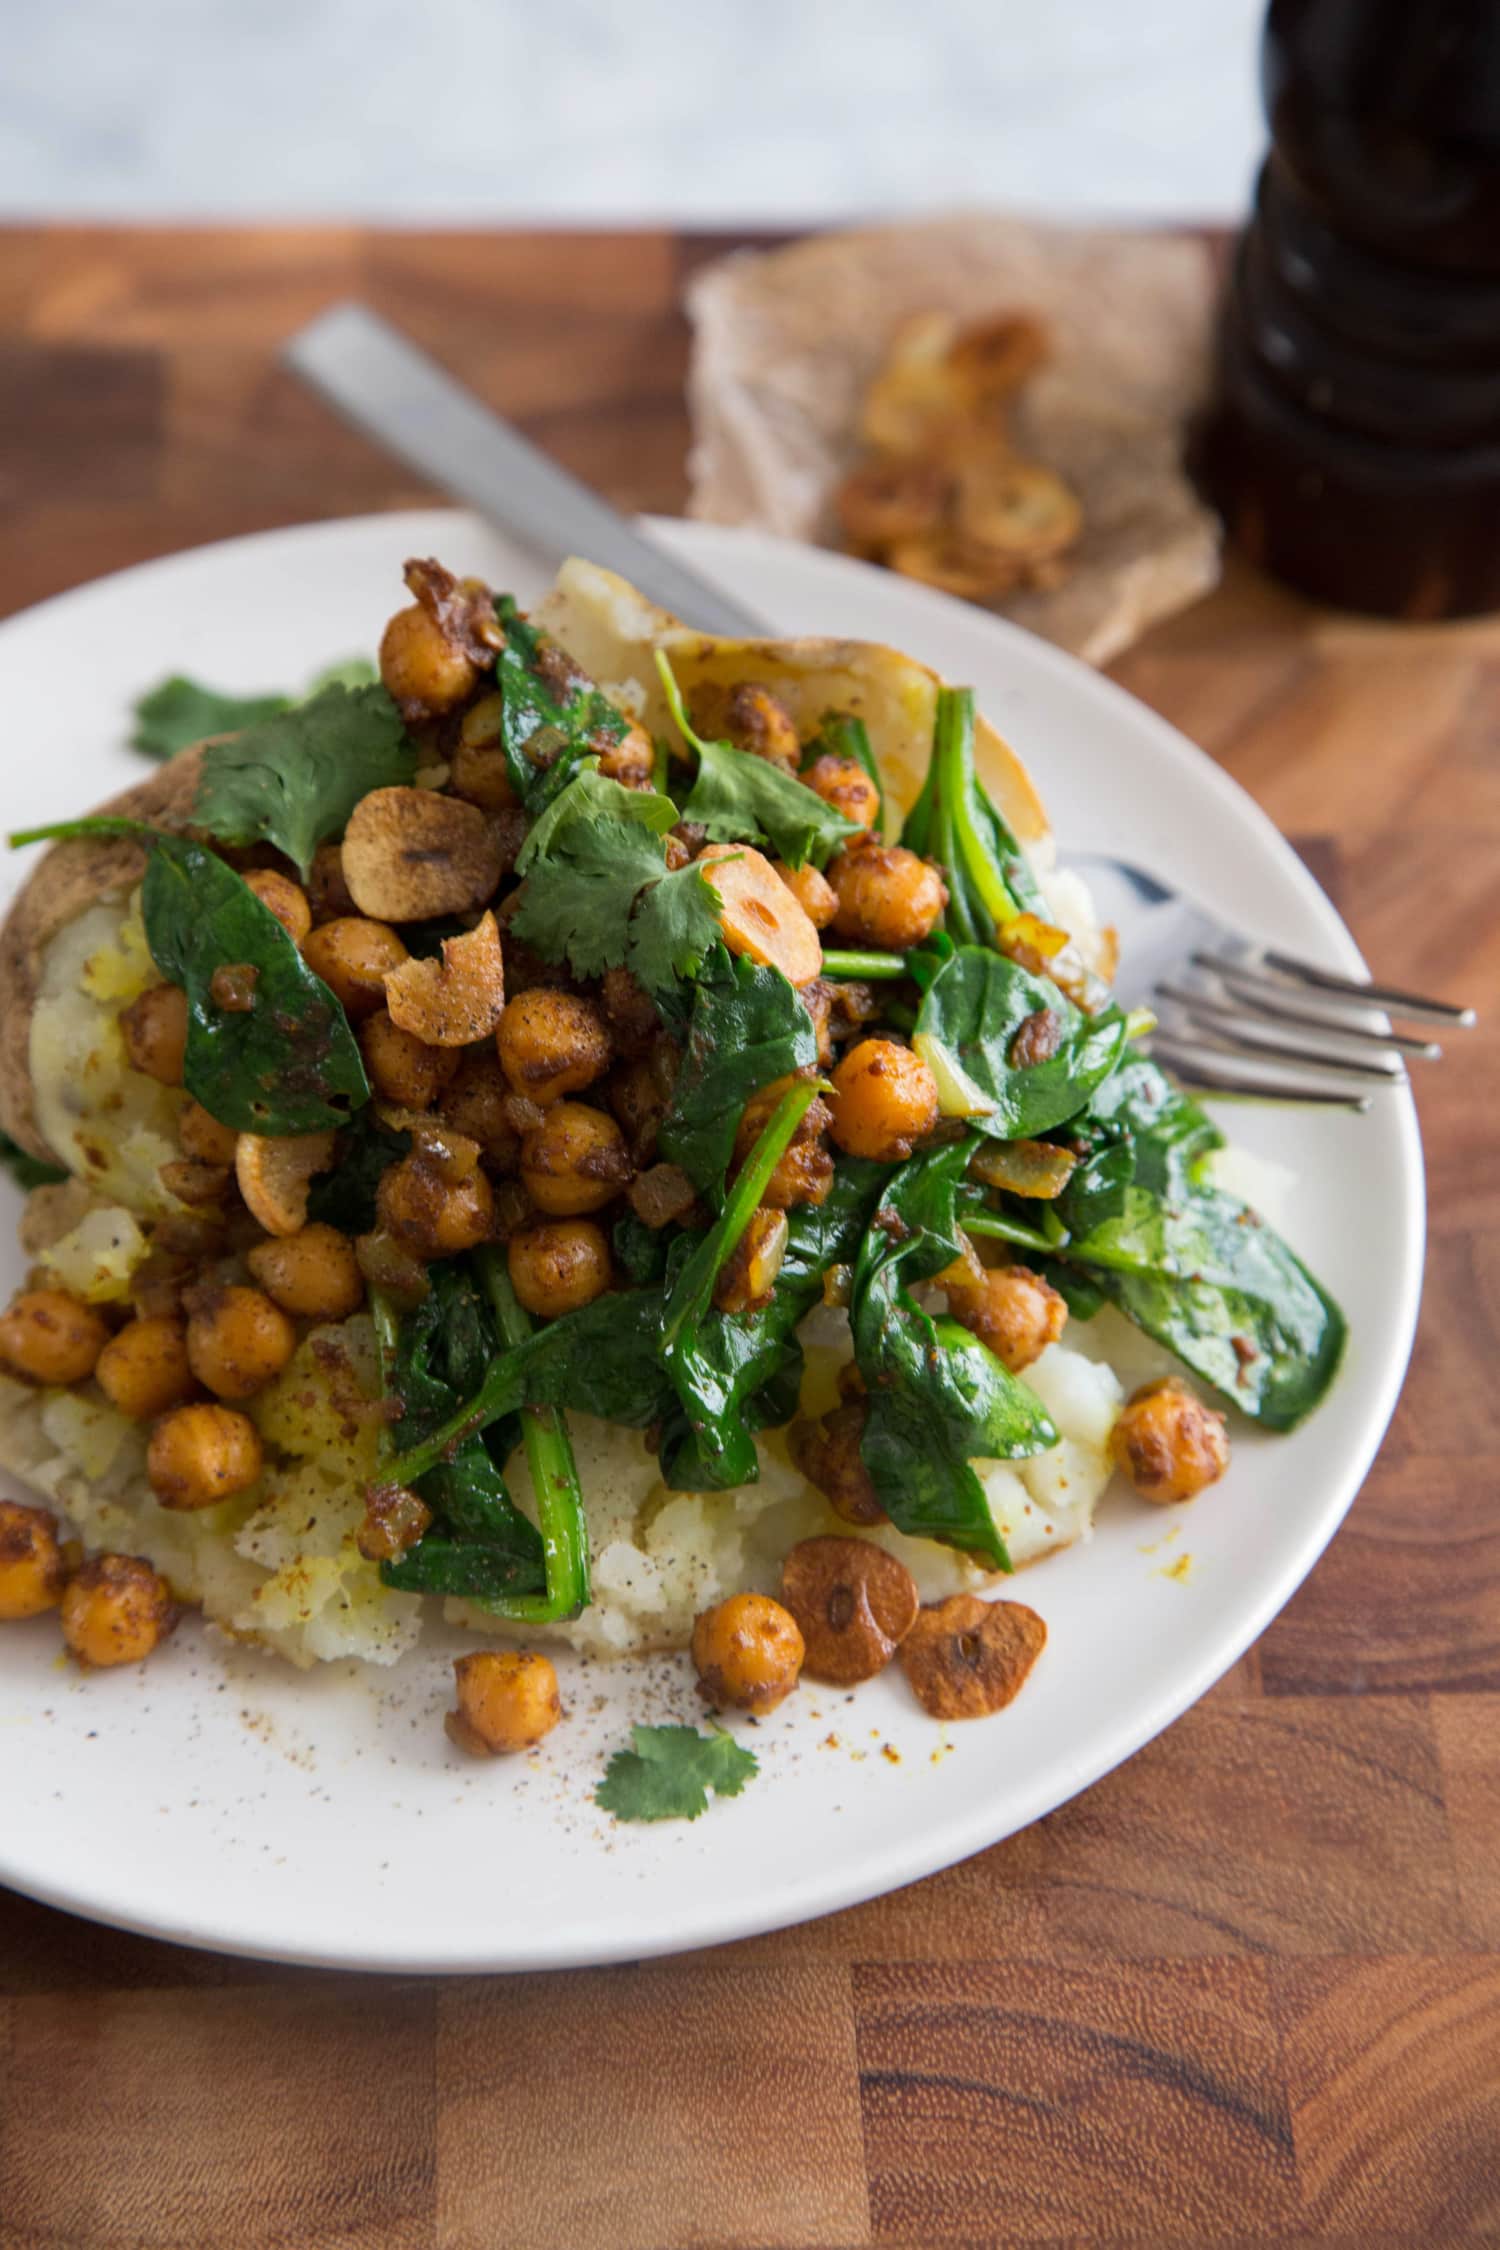 Recipe: Curried Chickpea & Spinach Baked Potato | Kitchn